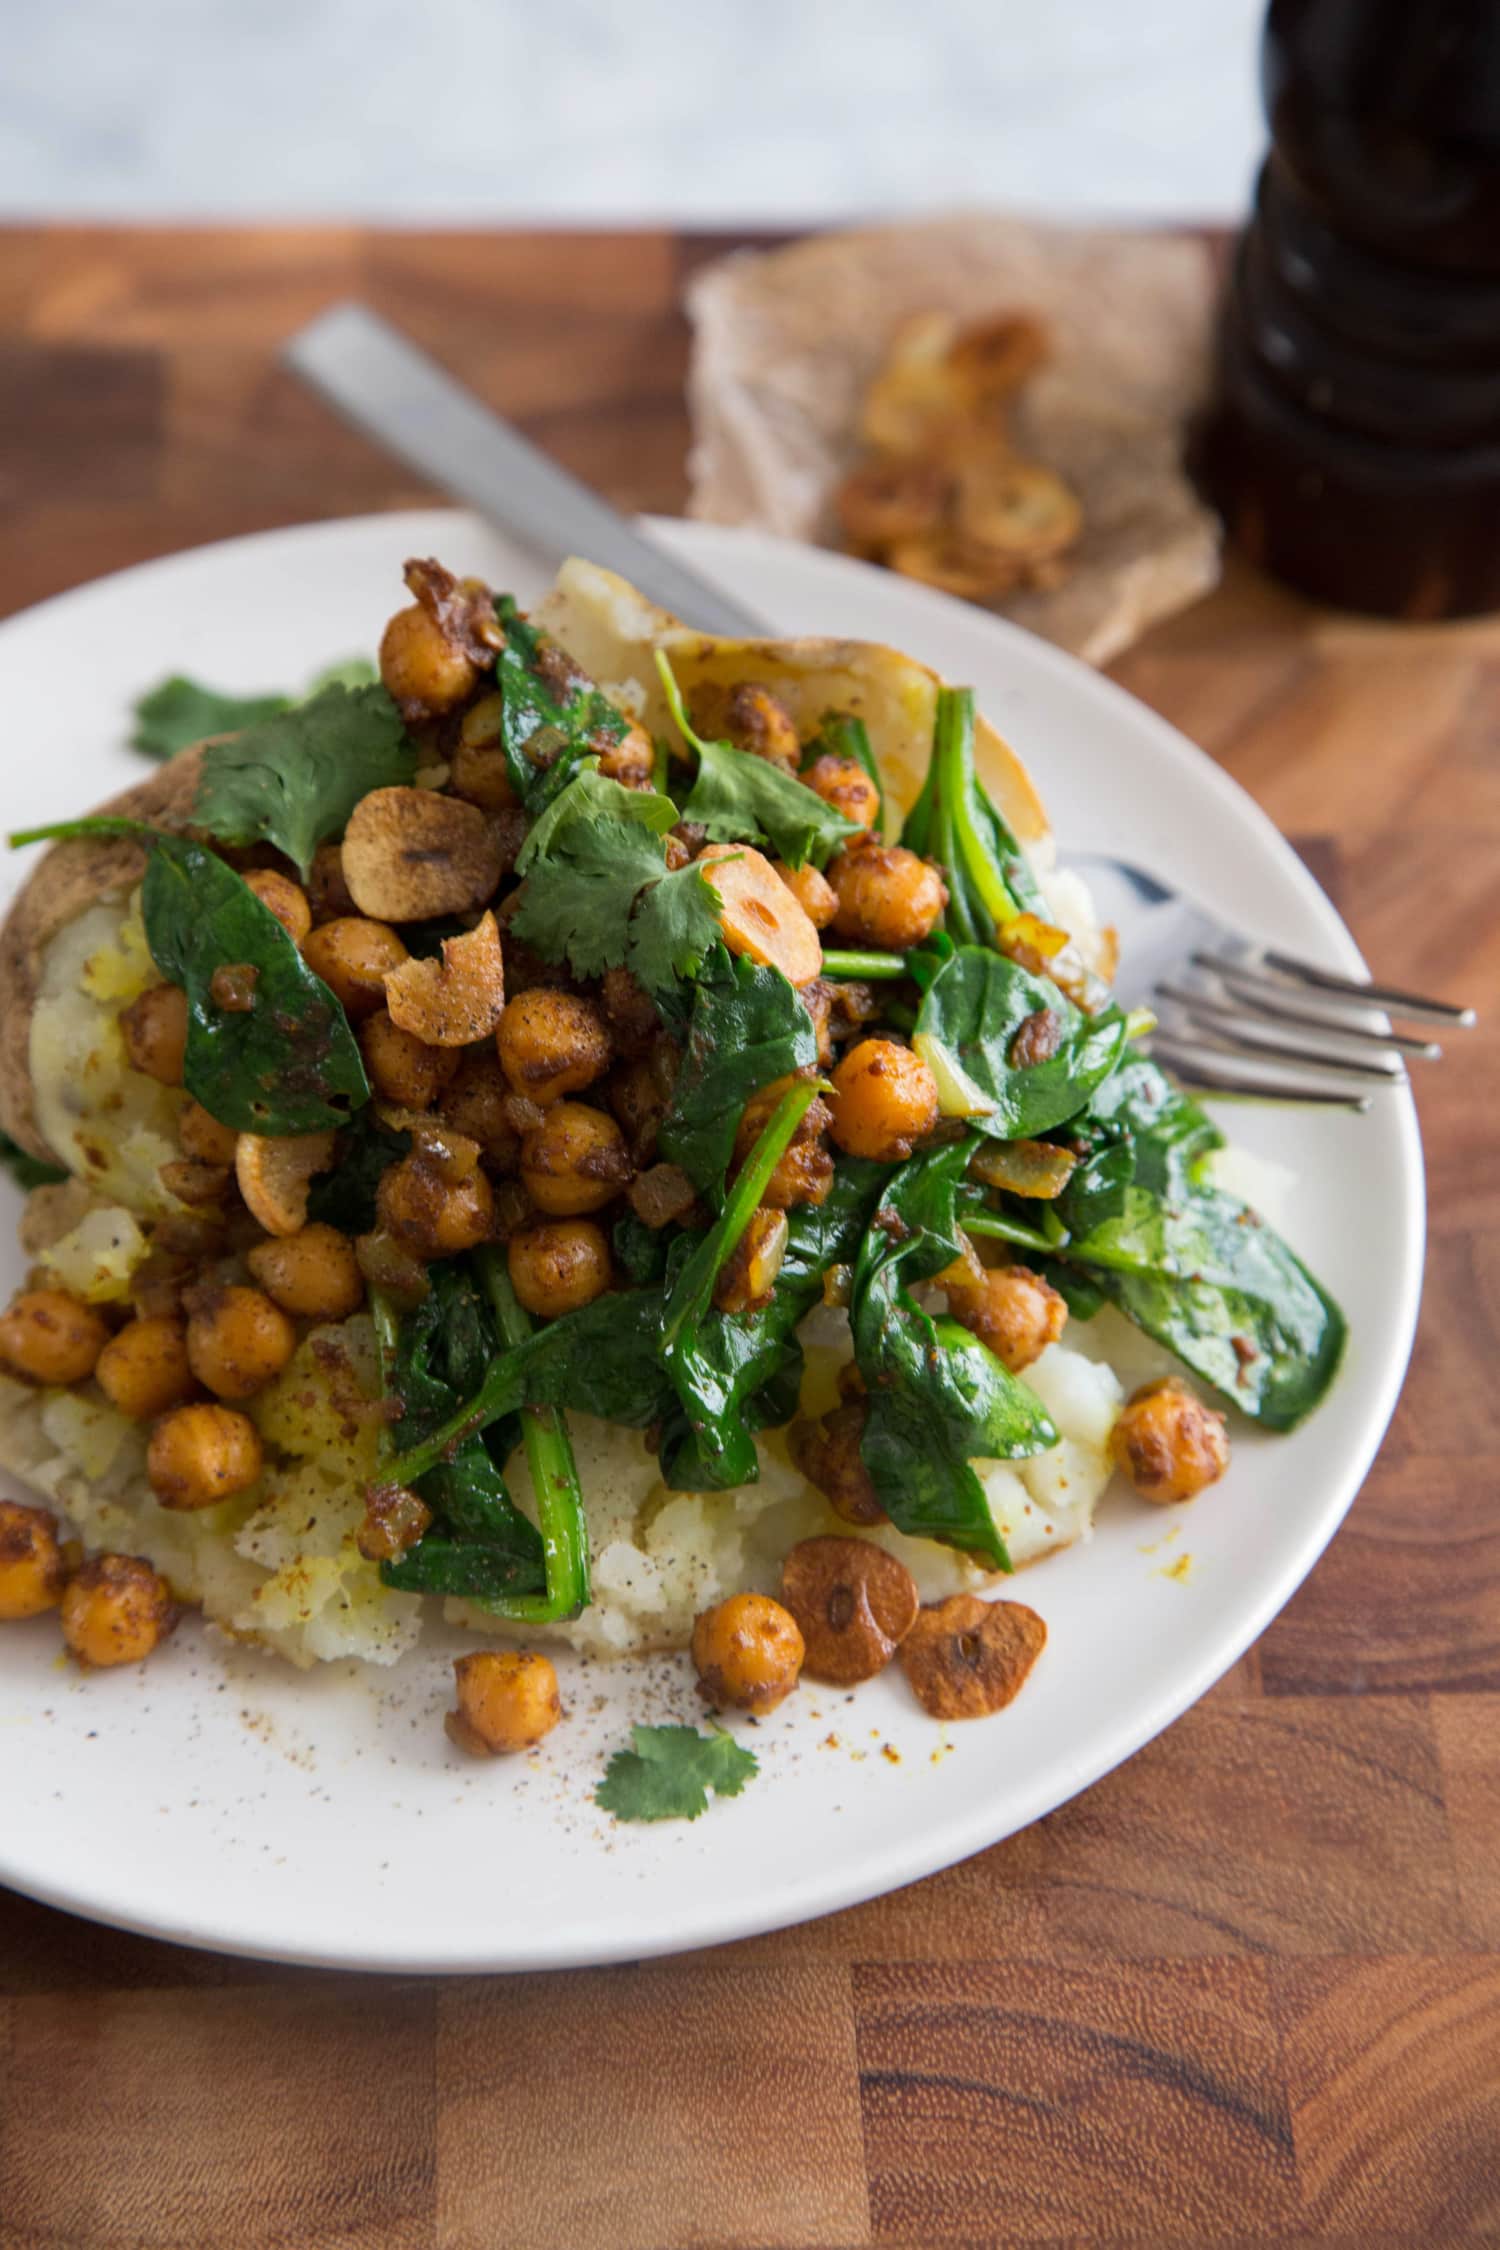 Recipe: Curried Chickpea & Spinach Baked Potato | Kitchn